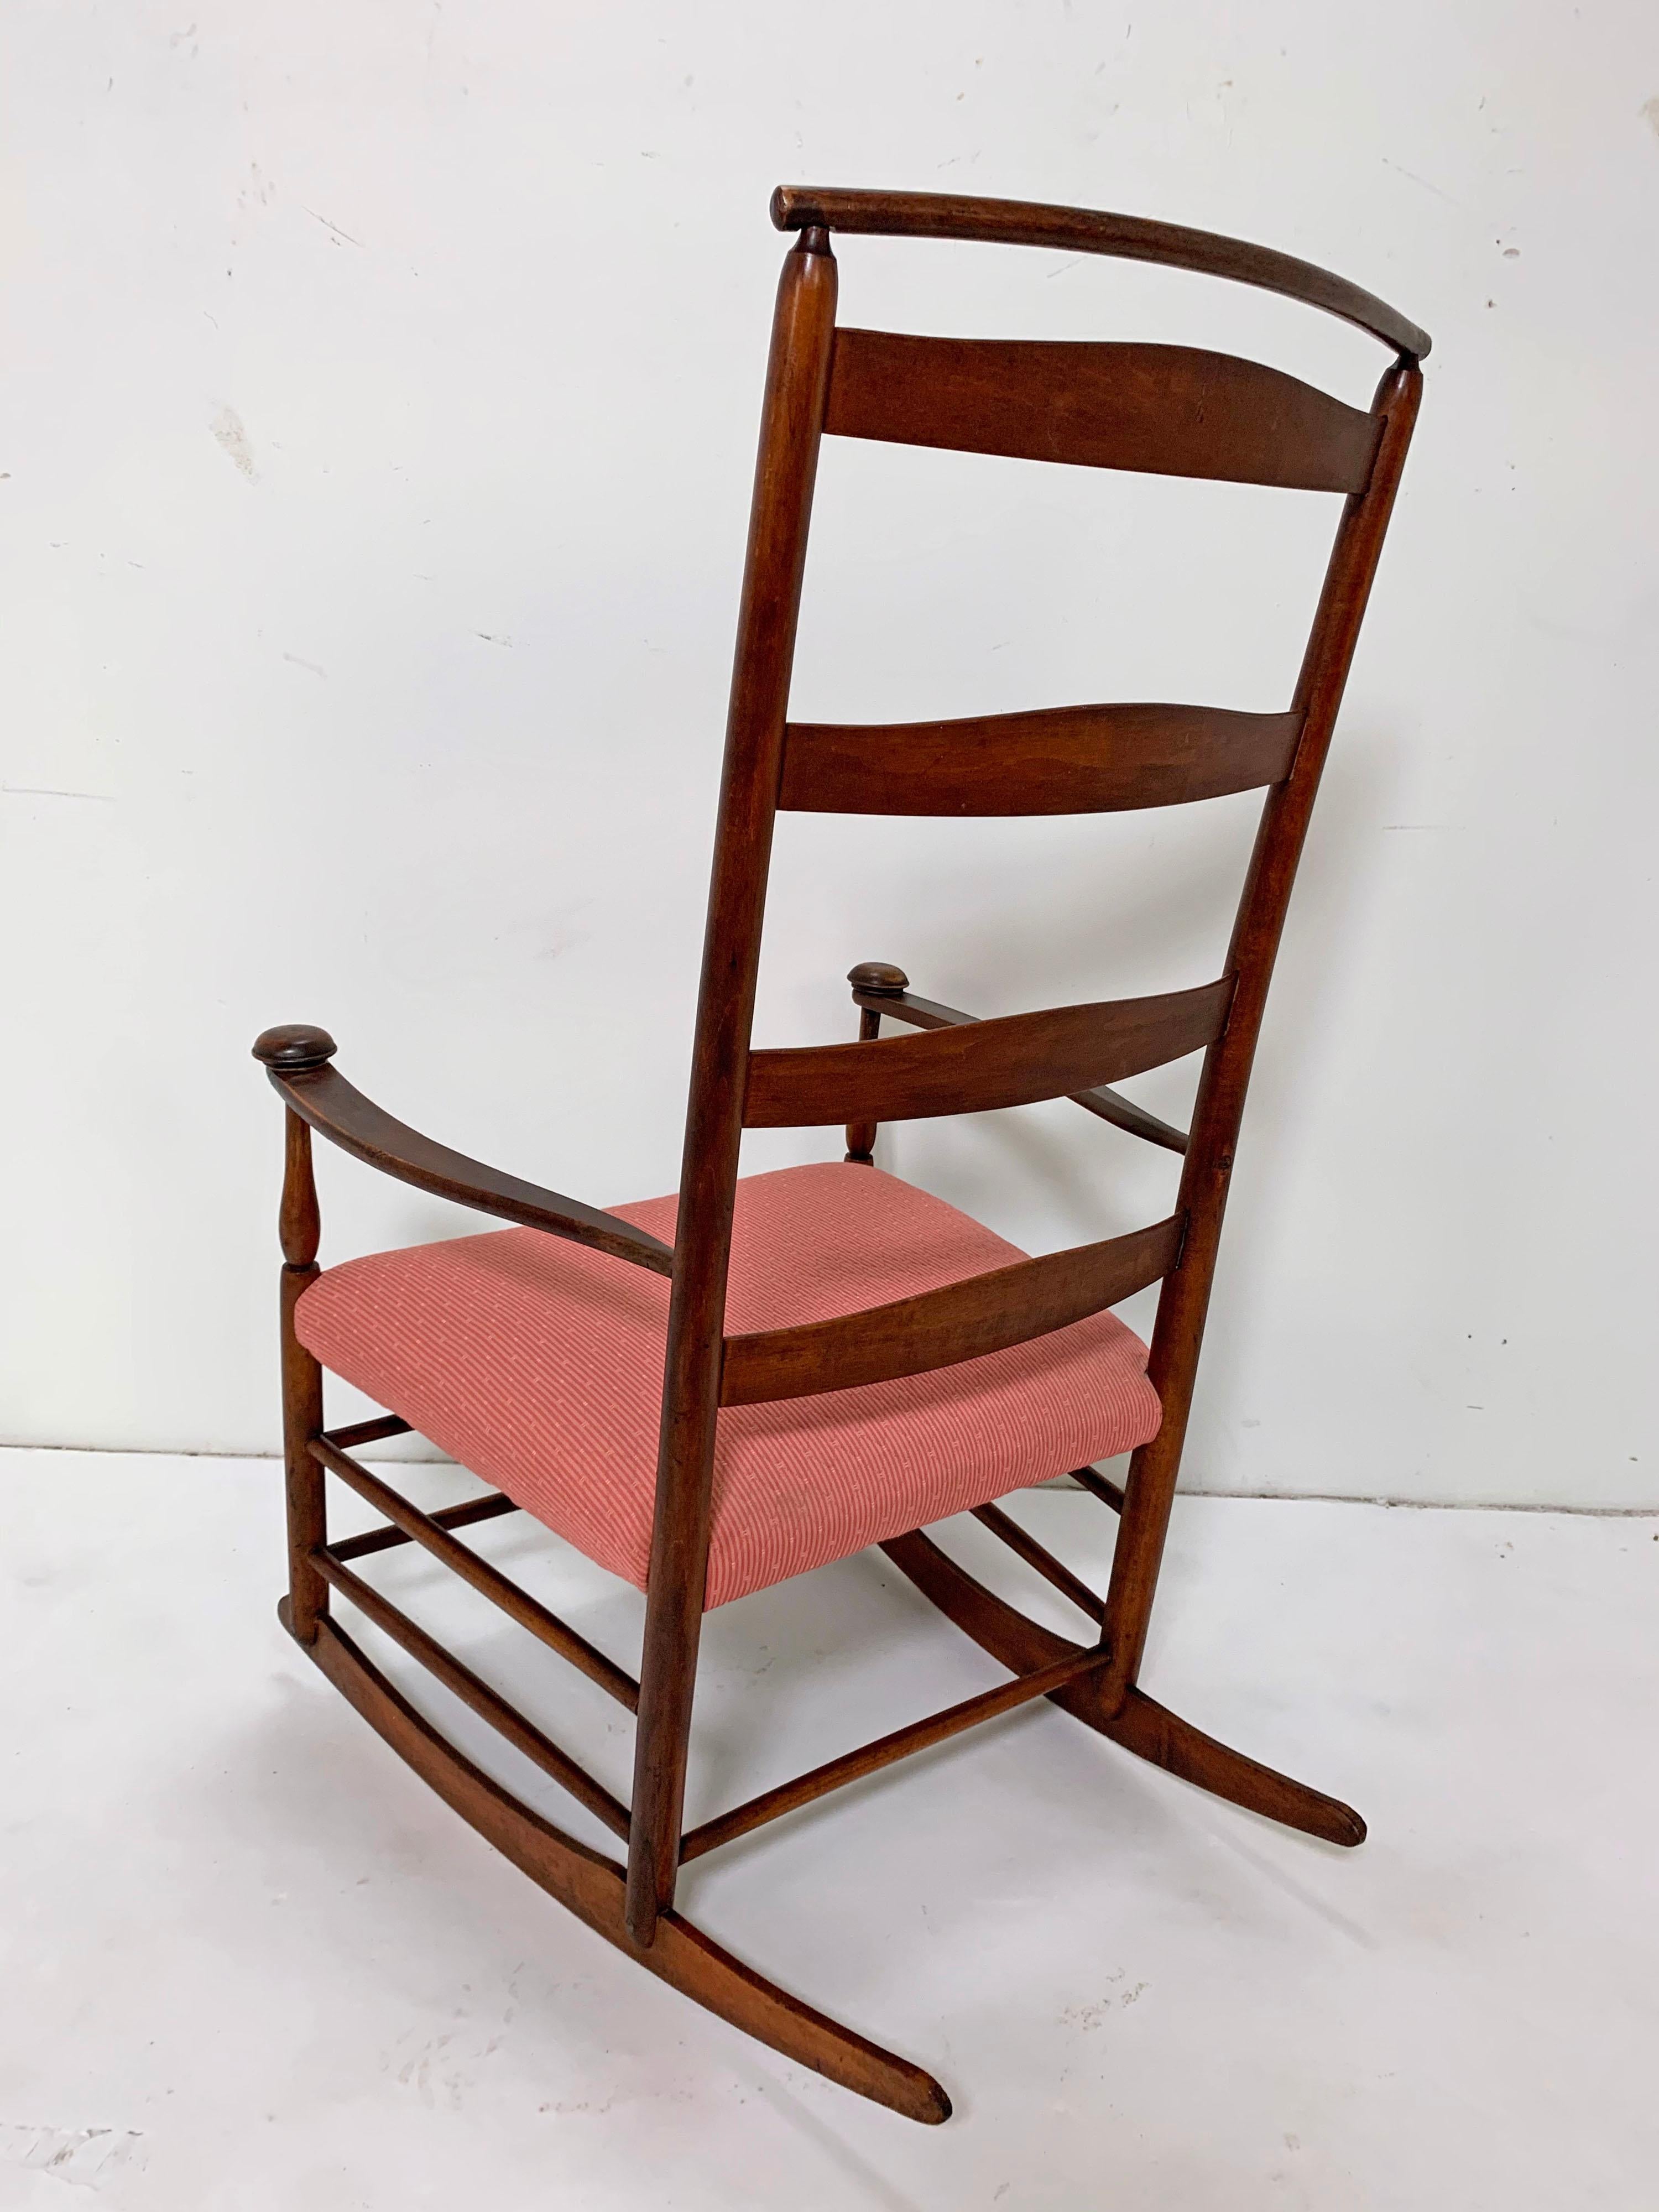 American Antique 19th Century Shaker No. 7 Rocking Chair with Shawl Bar